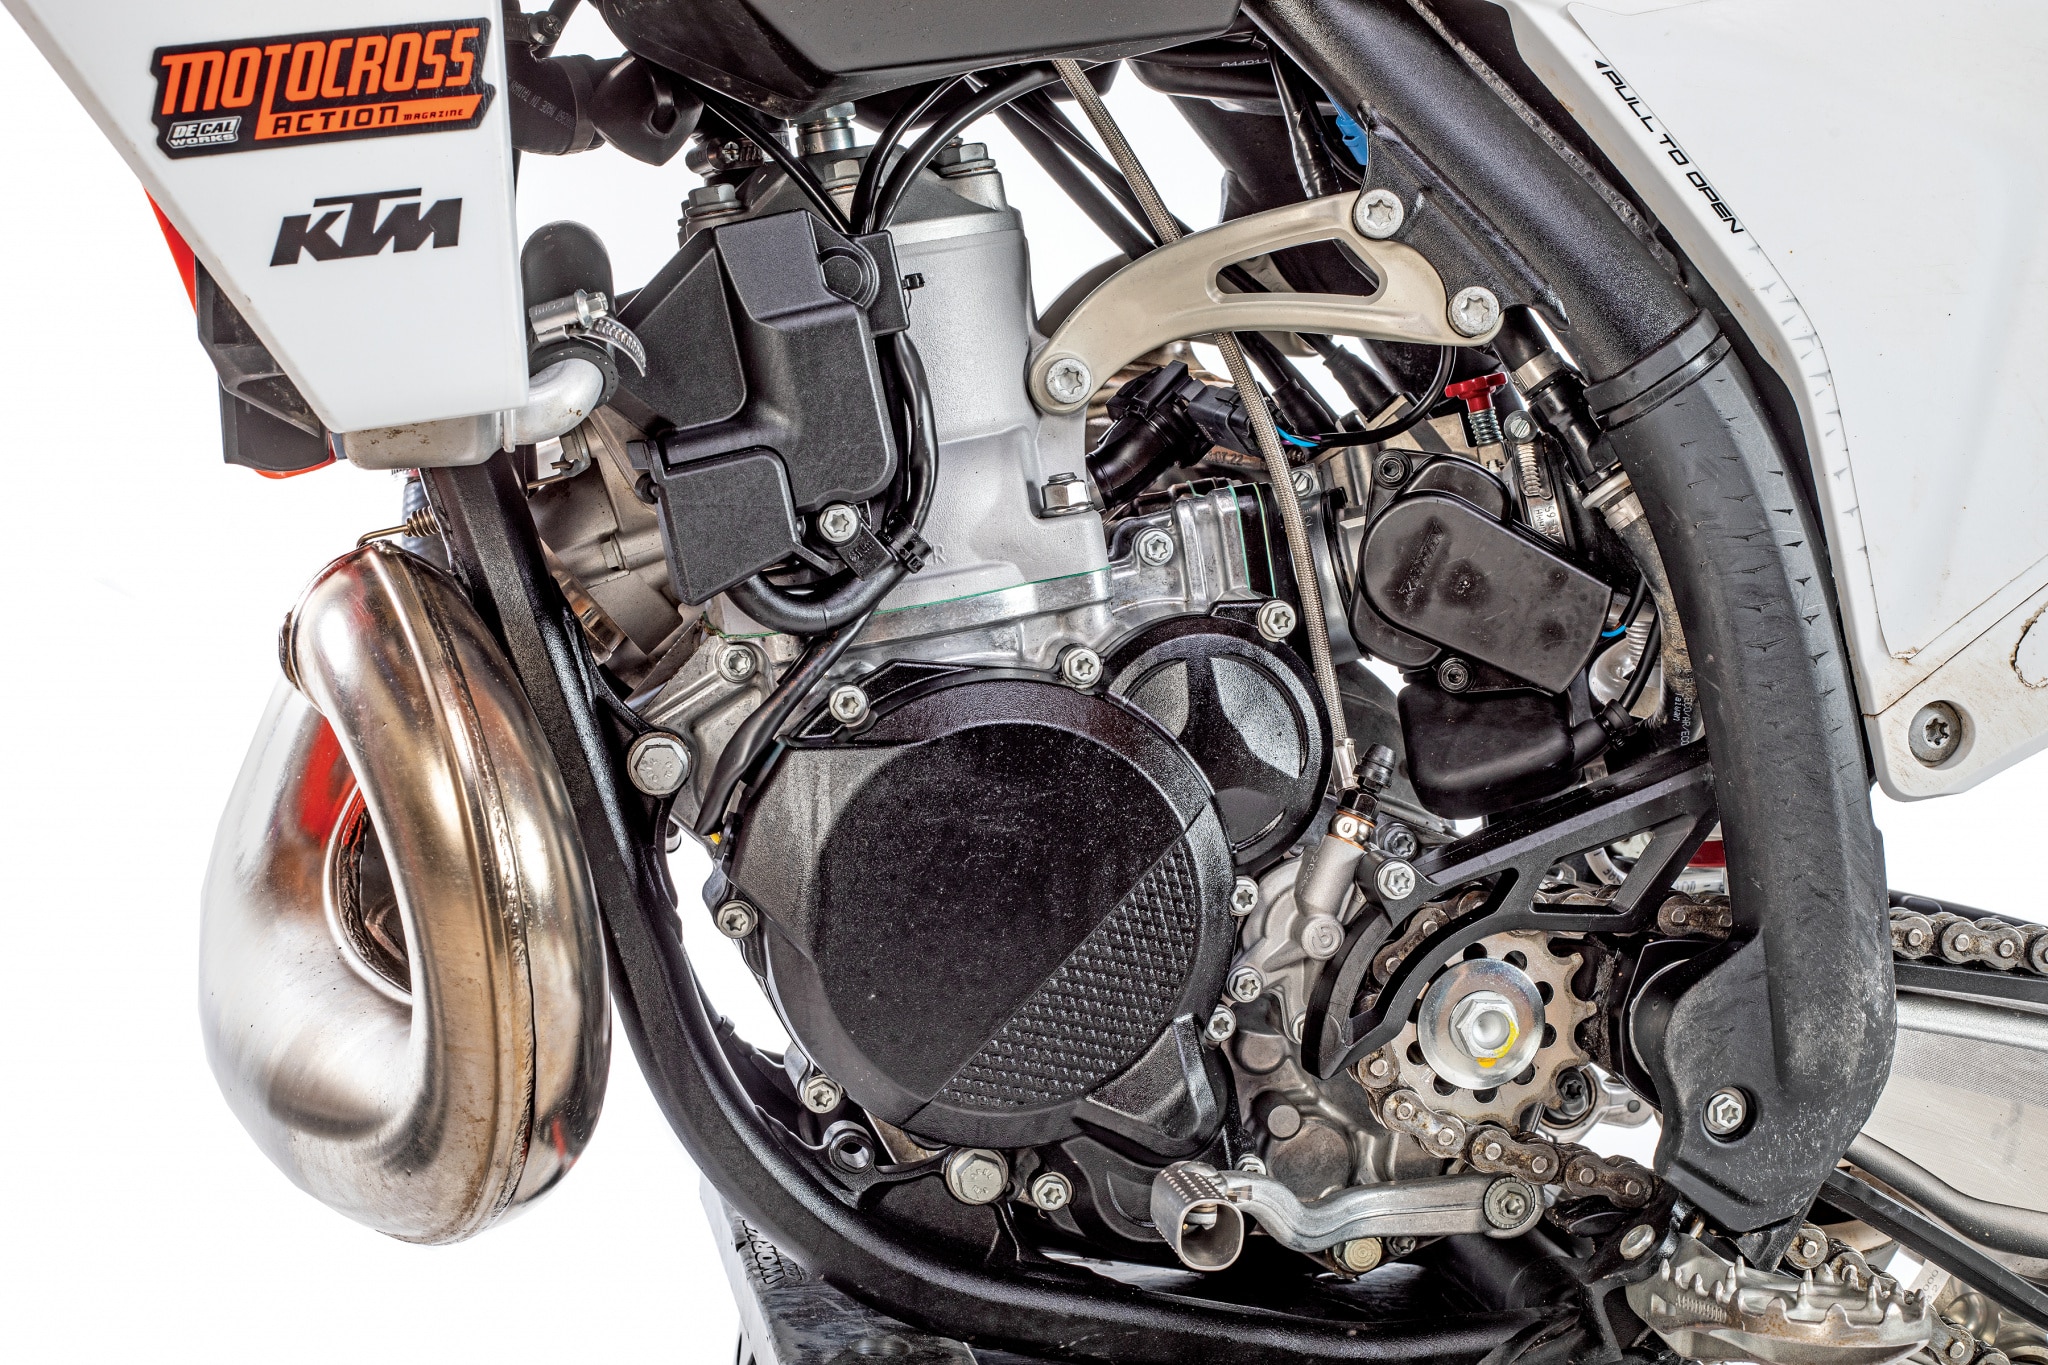 Tested: Two Stroke Performance Power Kits for the TPI